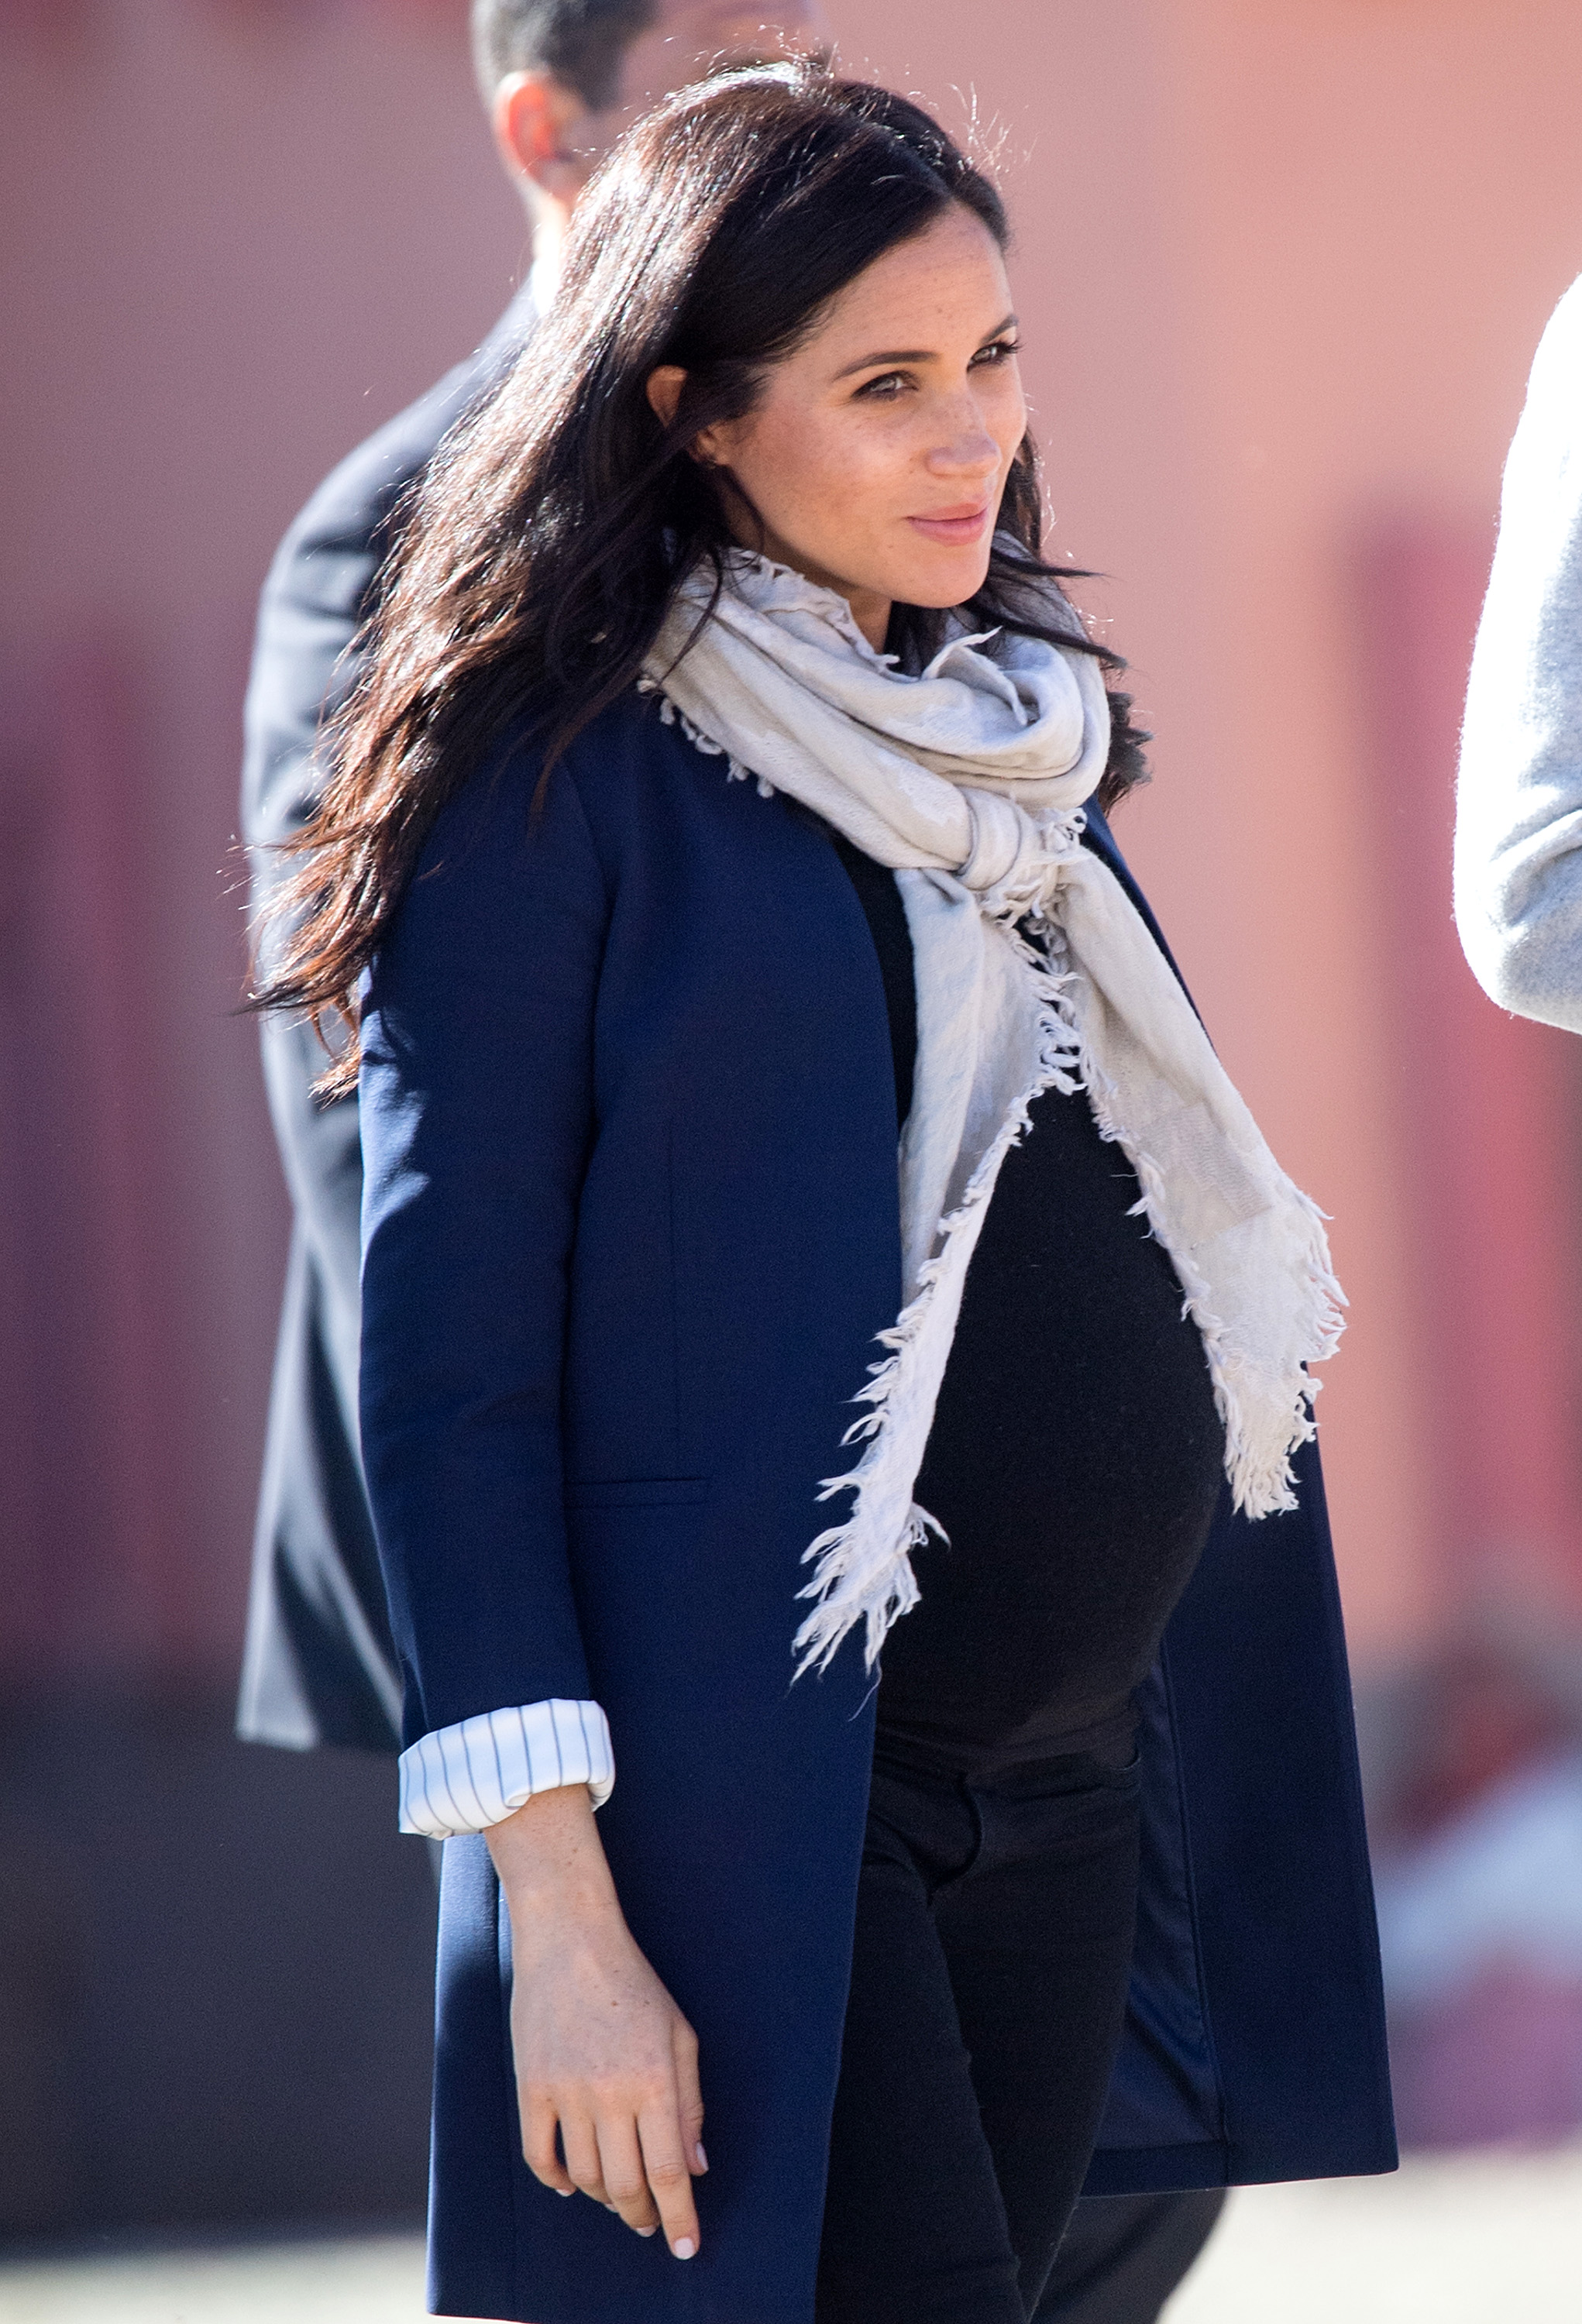 Meghan, Duchess of Sussex in Morocco in 2019 | Source: Getty Images